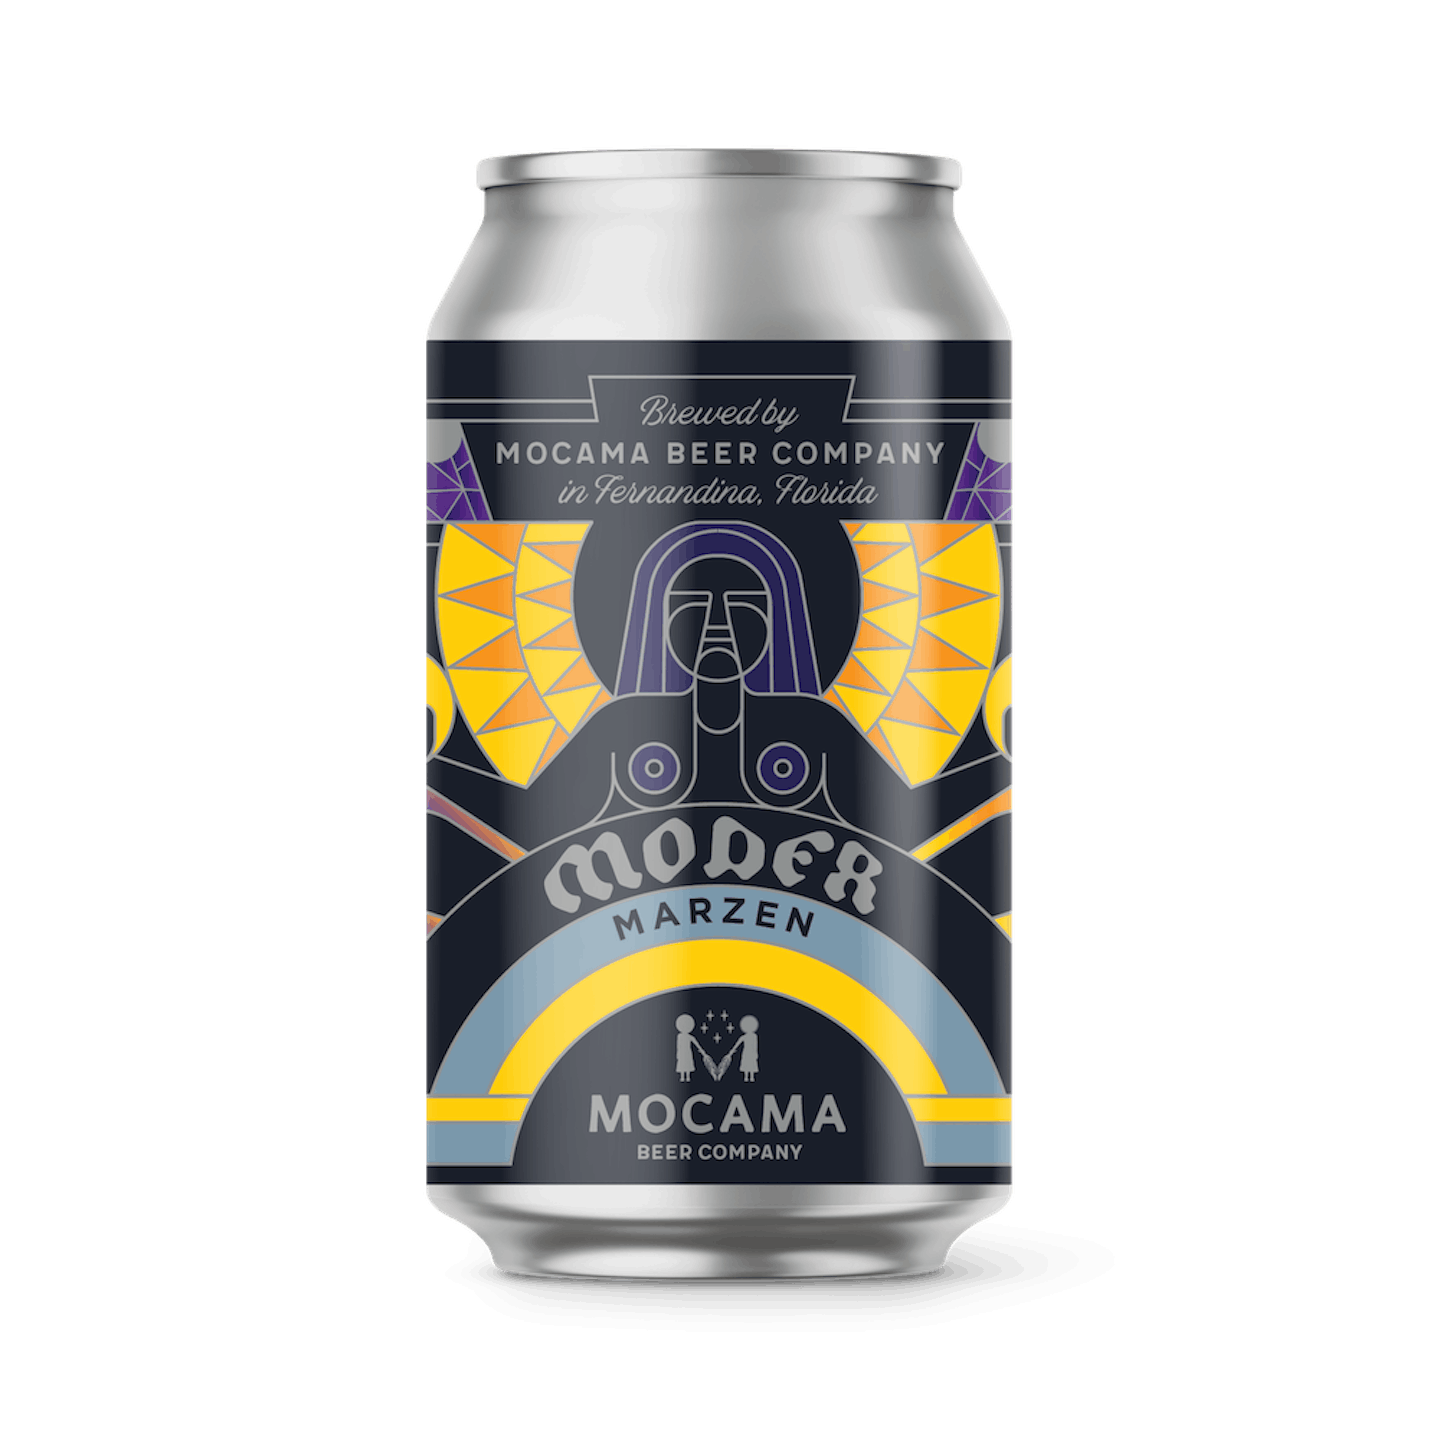 A can illustration of moder marzen lager beer. Yellow and purple label on a silver aluminum can.